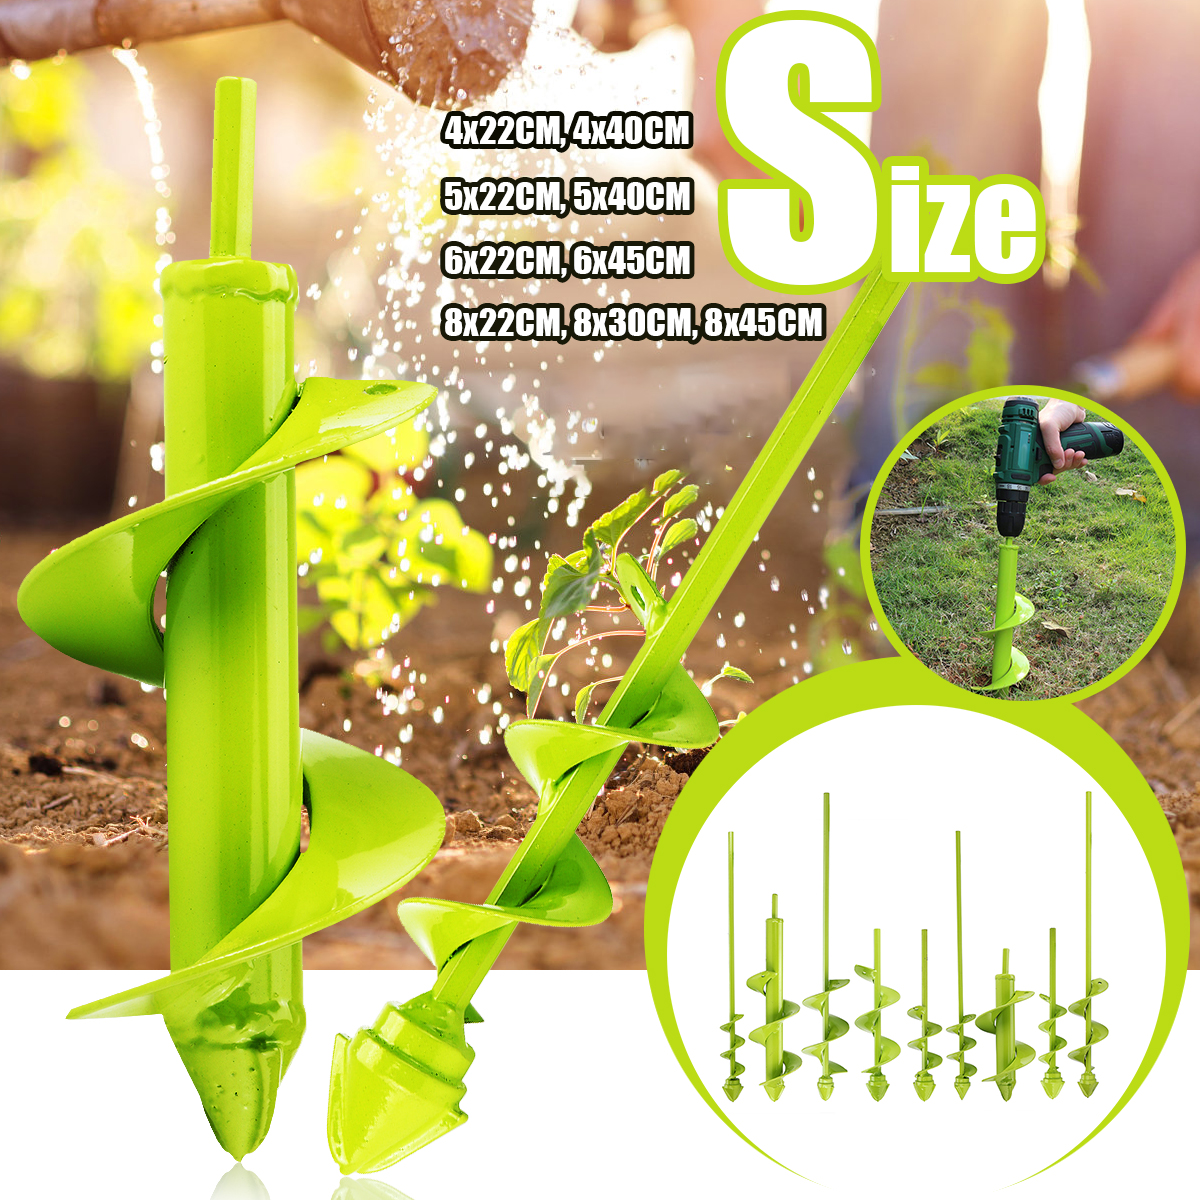 Electric-Power-Garden-Auger-Drill-Bits-Earth-Planter-Spiral-Post-Hole-Digger-Kit-1545611-1